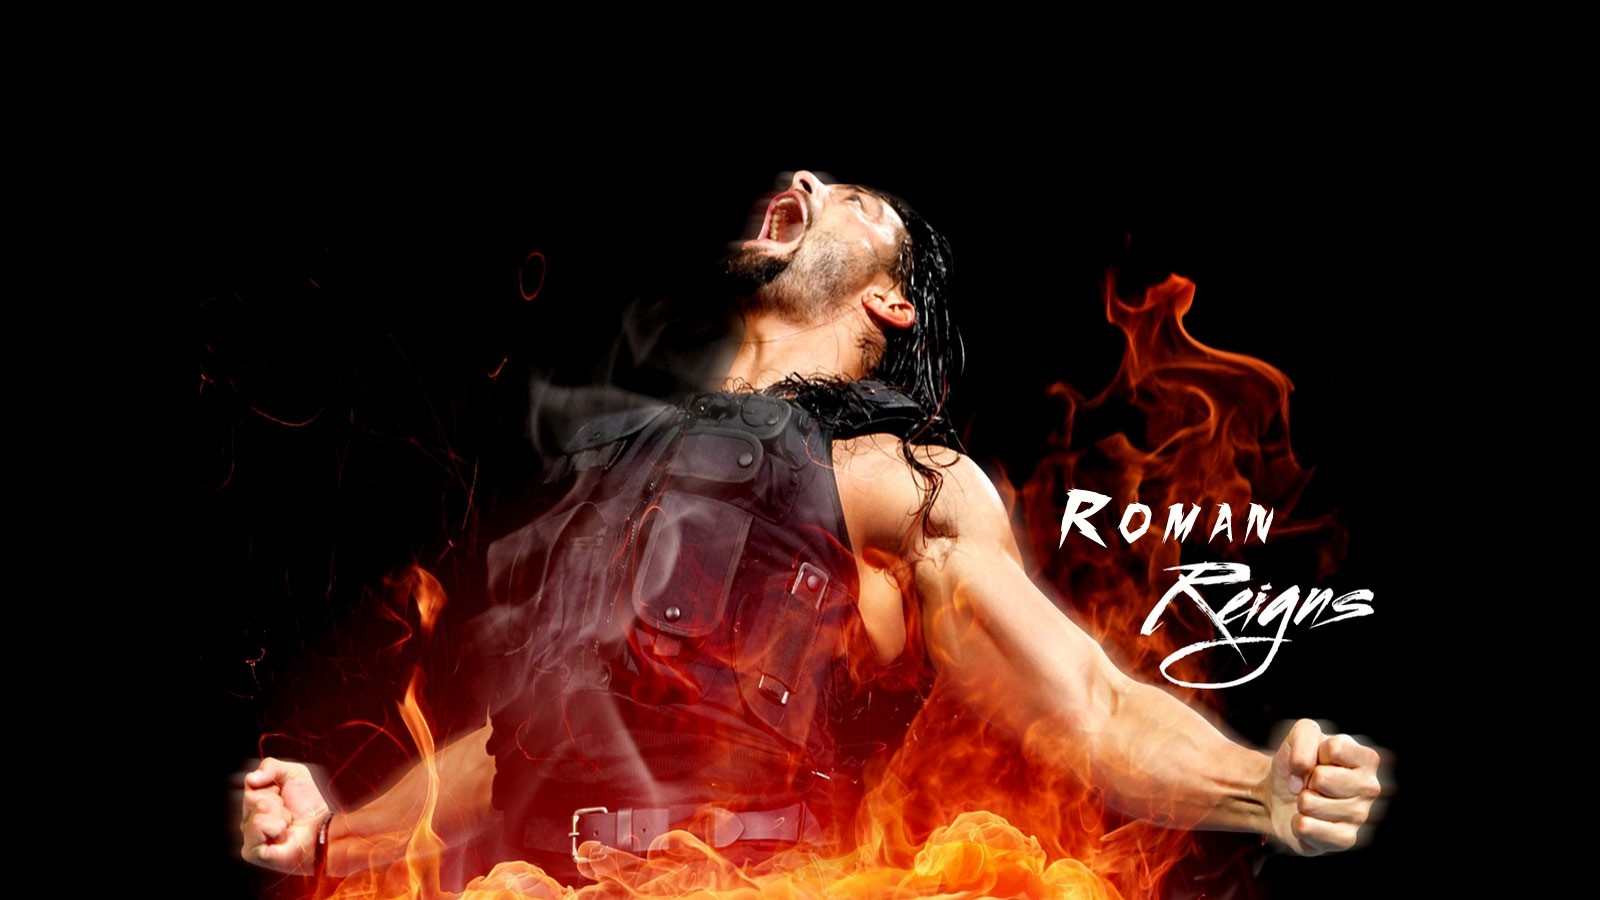 On Fire Wwe HD Wallpaper Search More Wrestling Or Boxers High